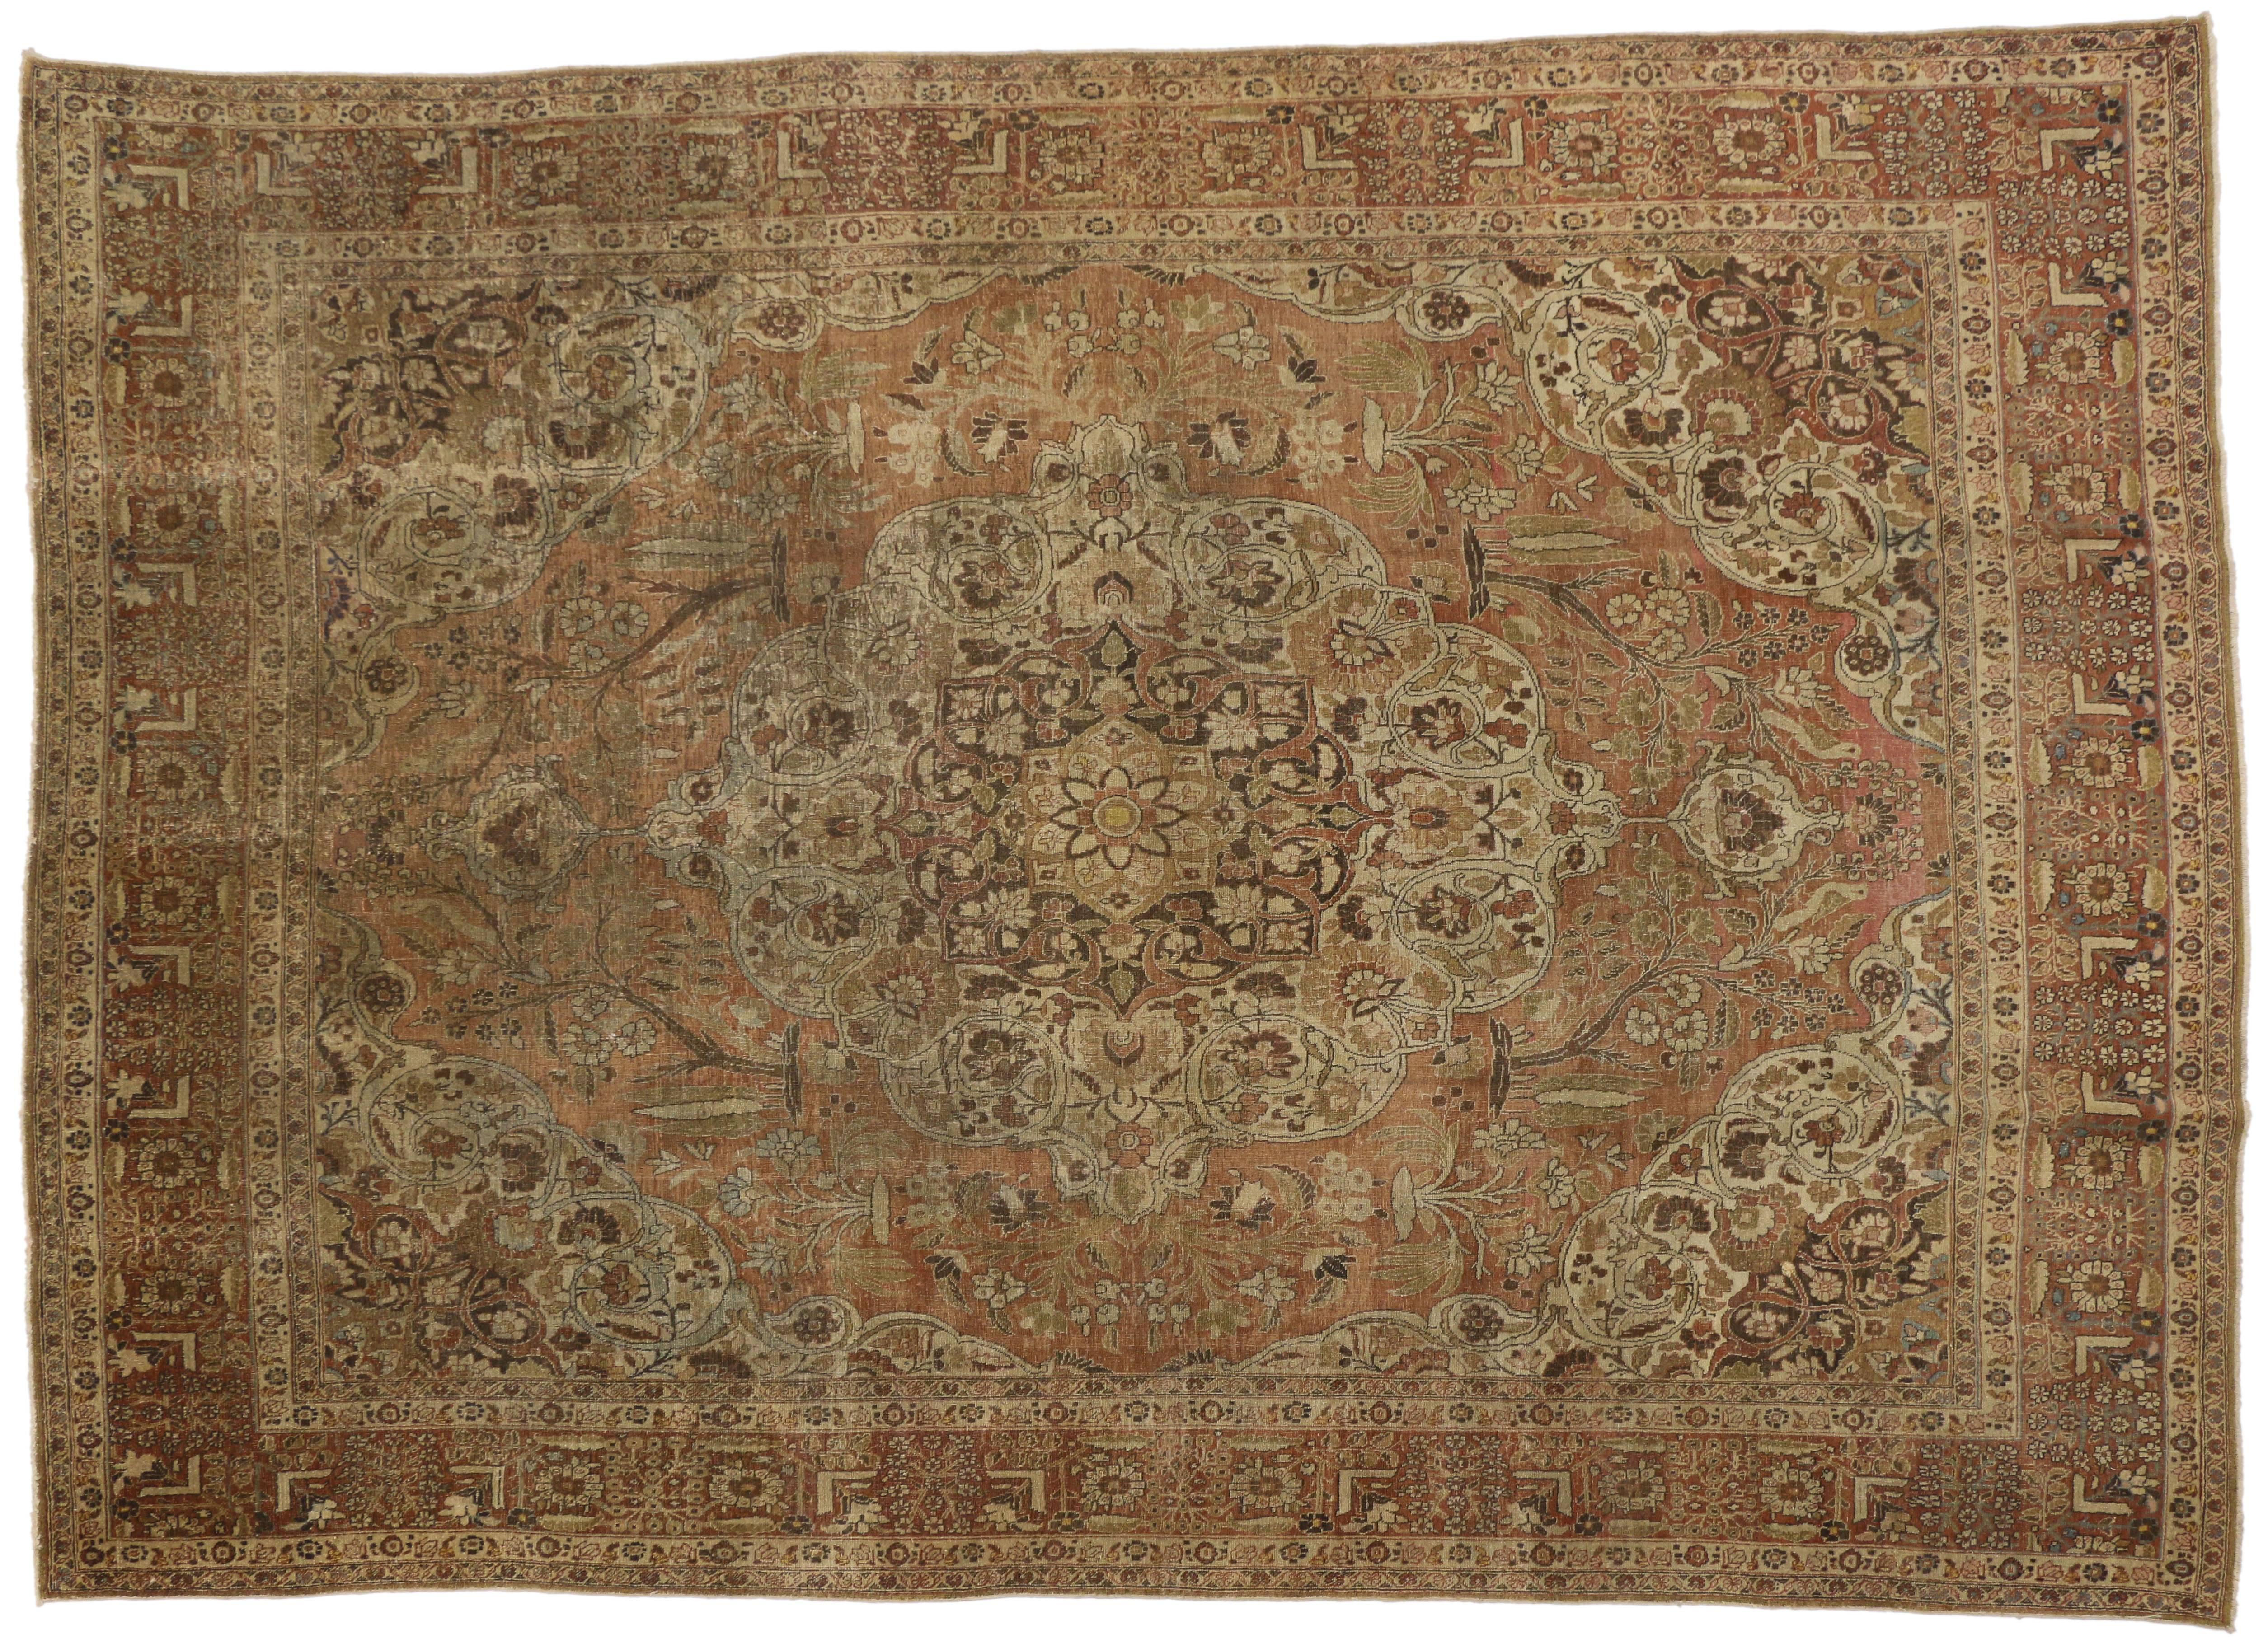 20th Century Distressed Antique Persian Tabriz Rug with Rustic English Traditional Style For Sale